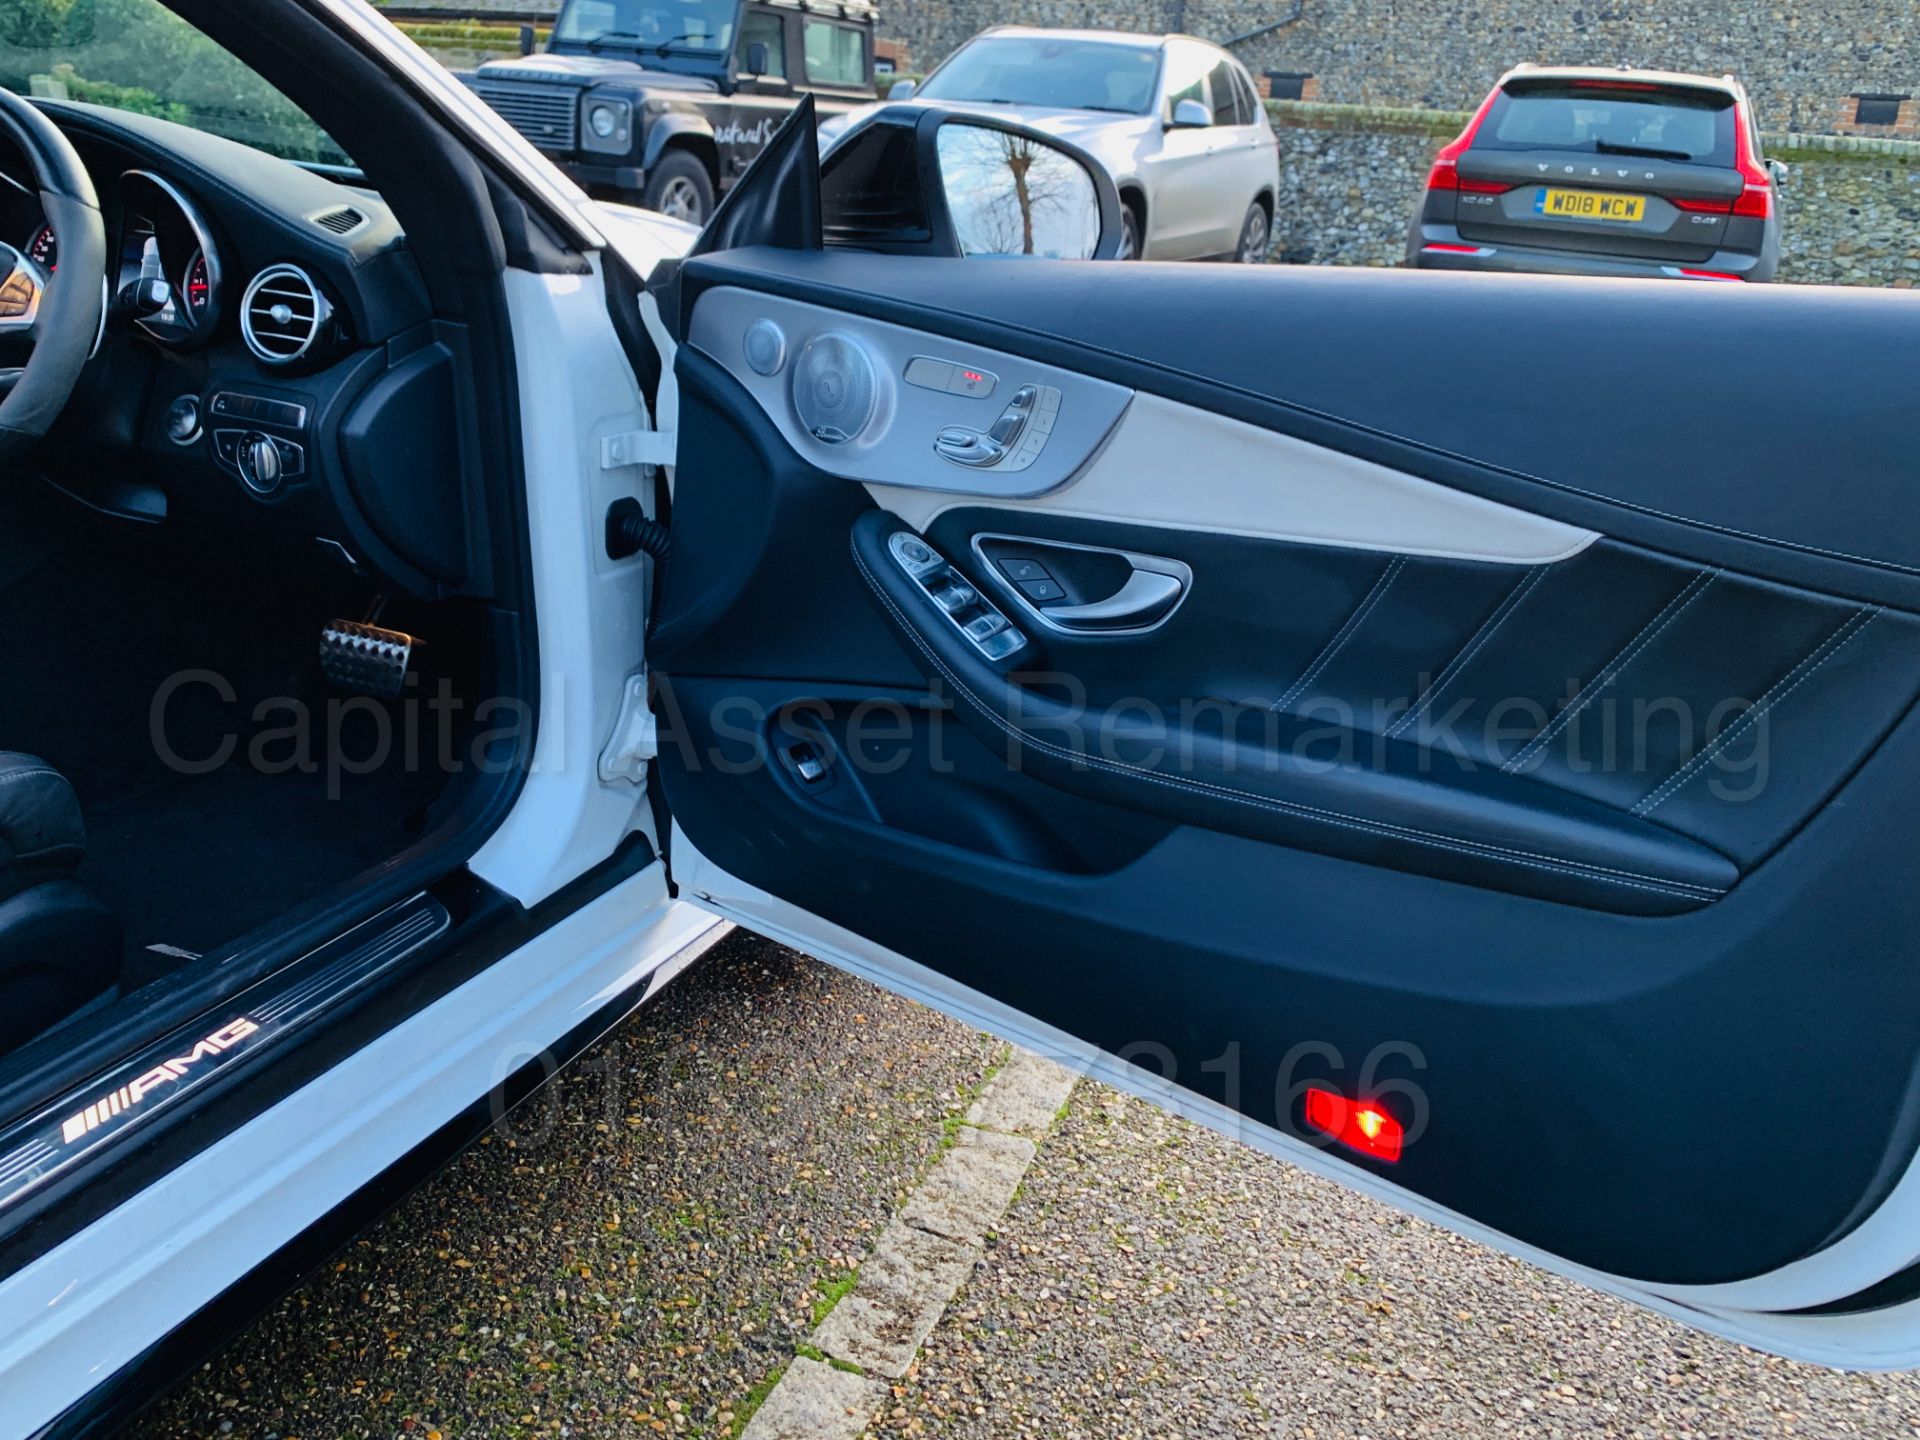 (On Sale) MERCEDES-BENZ AMG C63-S *CABRIOLET* (67 REG) '4.0 BI-TURBO -510 BHP - AUTO' *FULLY LOADED* - Image 55 of 79